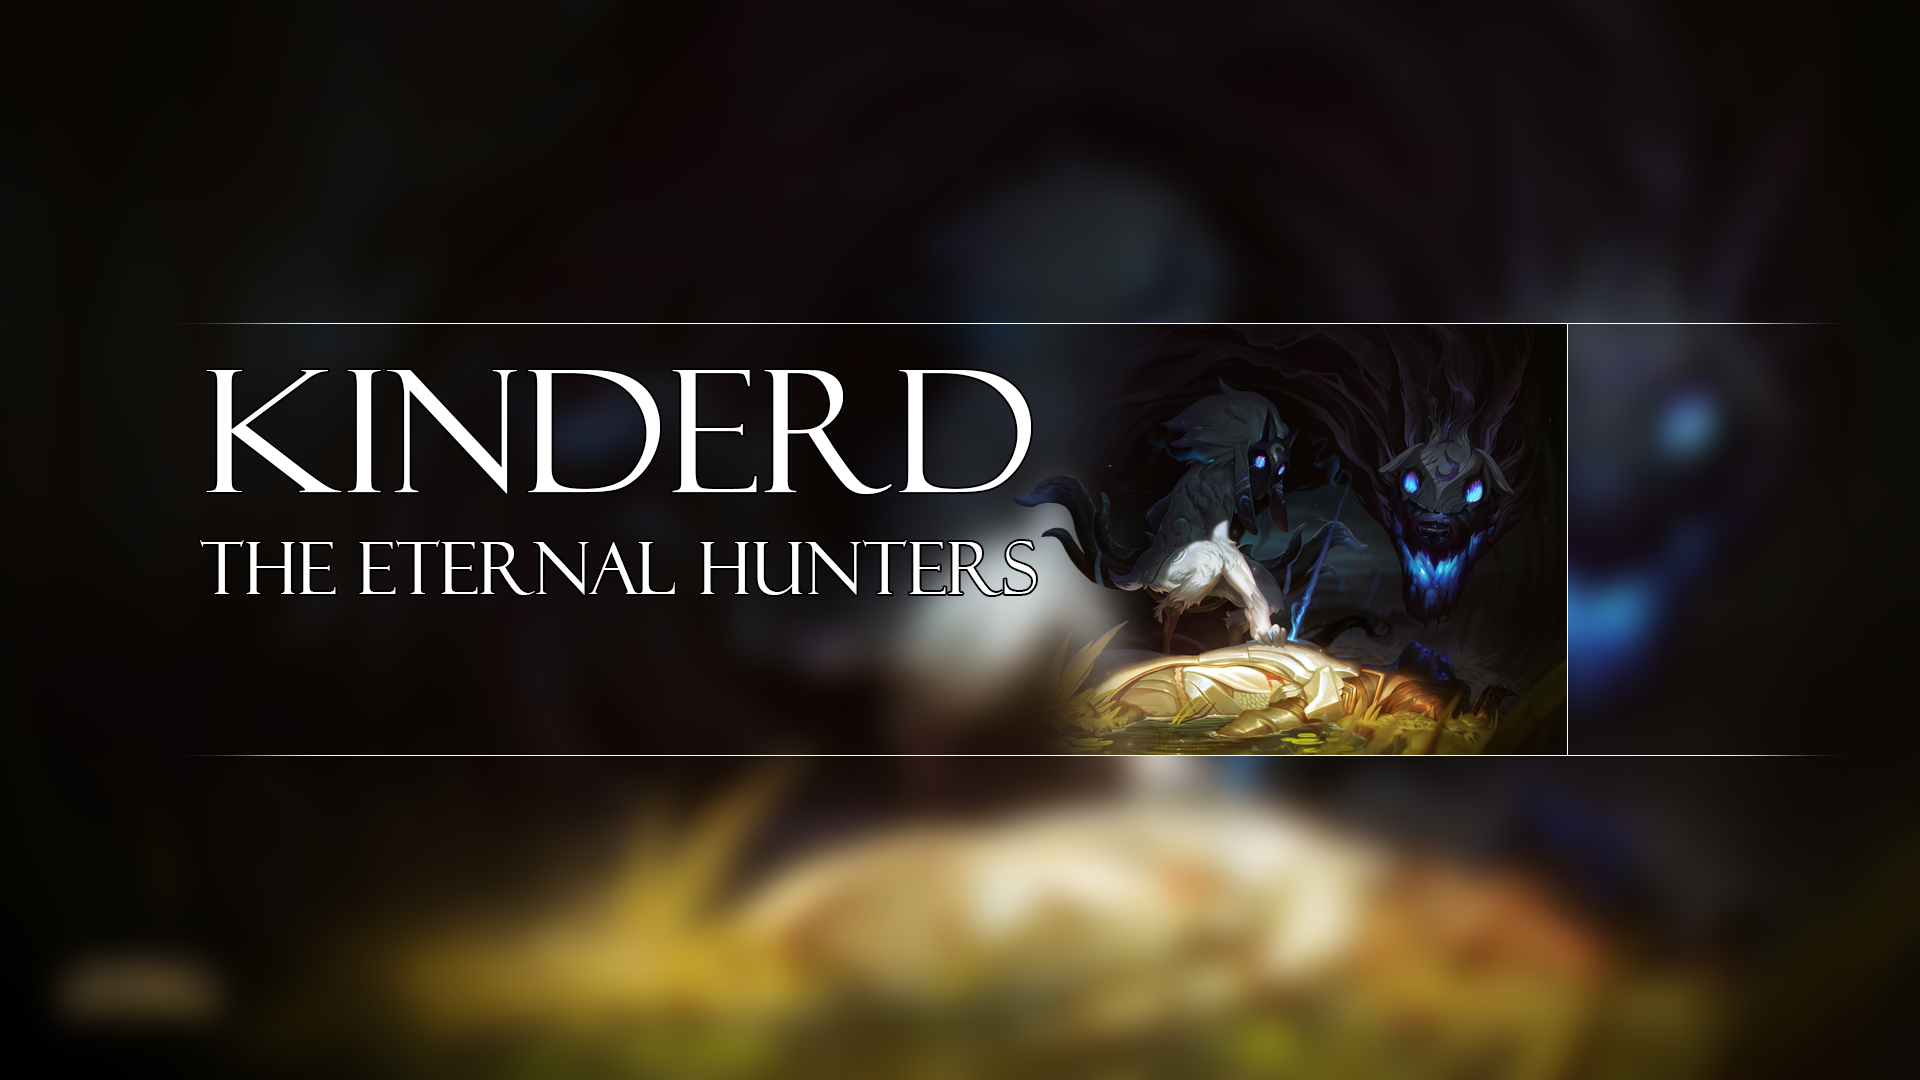 General 1920x1080 Kindred League of Legends PC gaming Kindred (League of Legends)